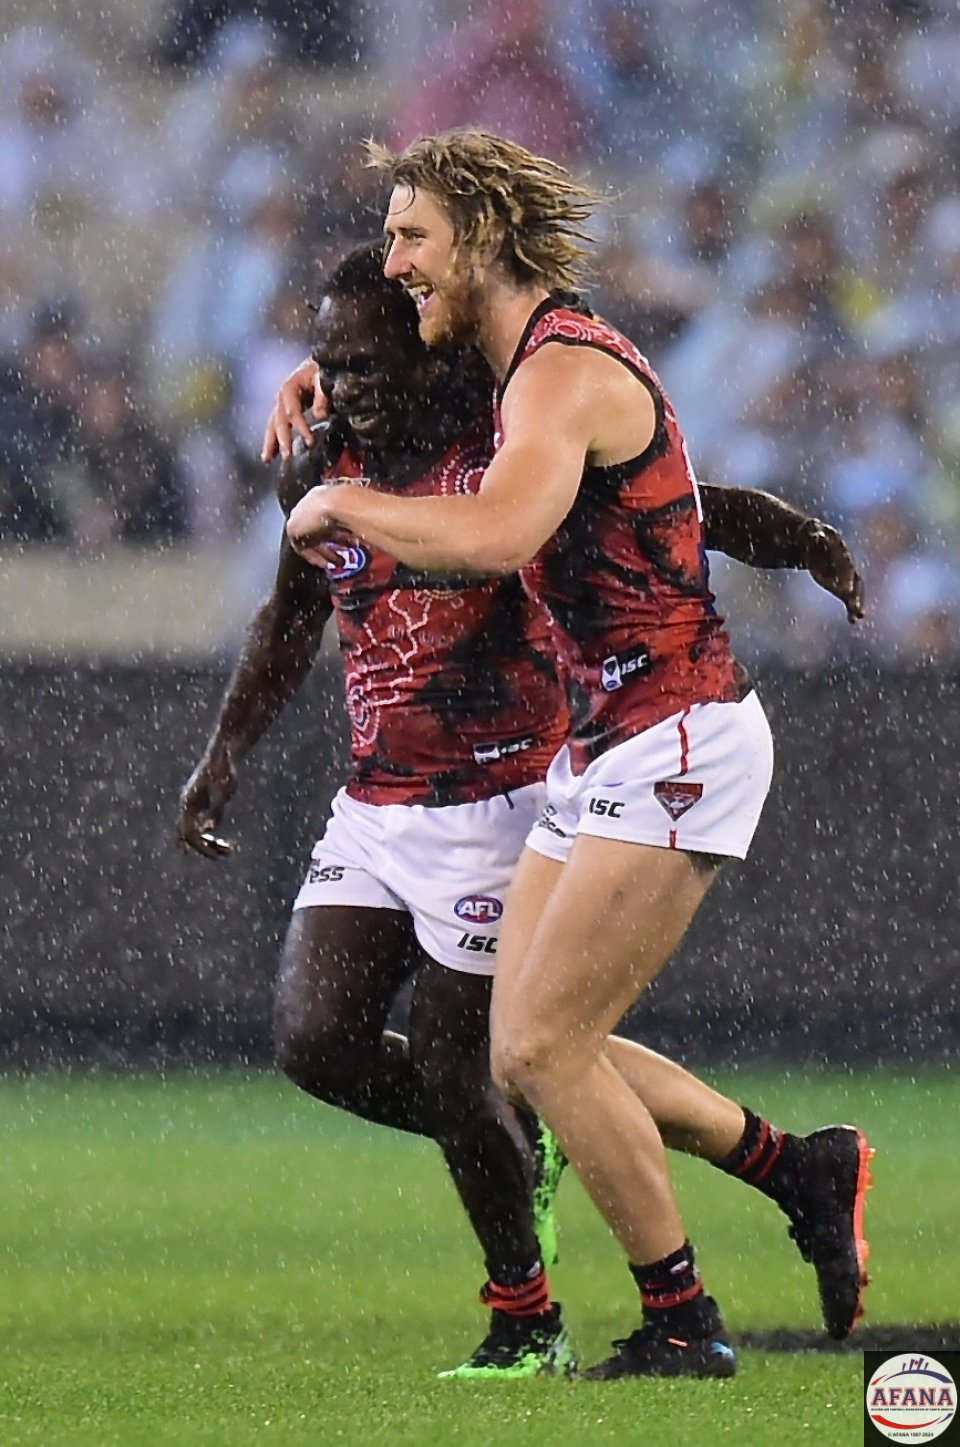 Heppell and Walla